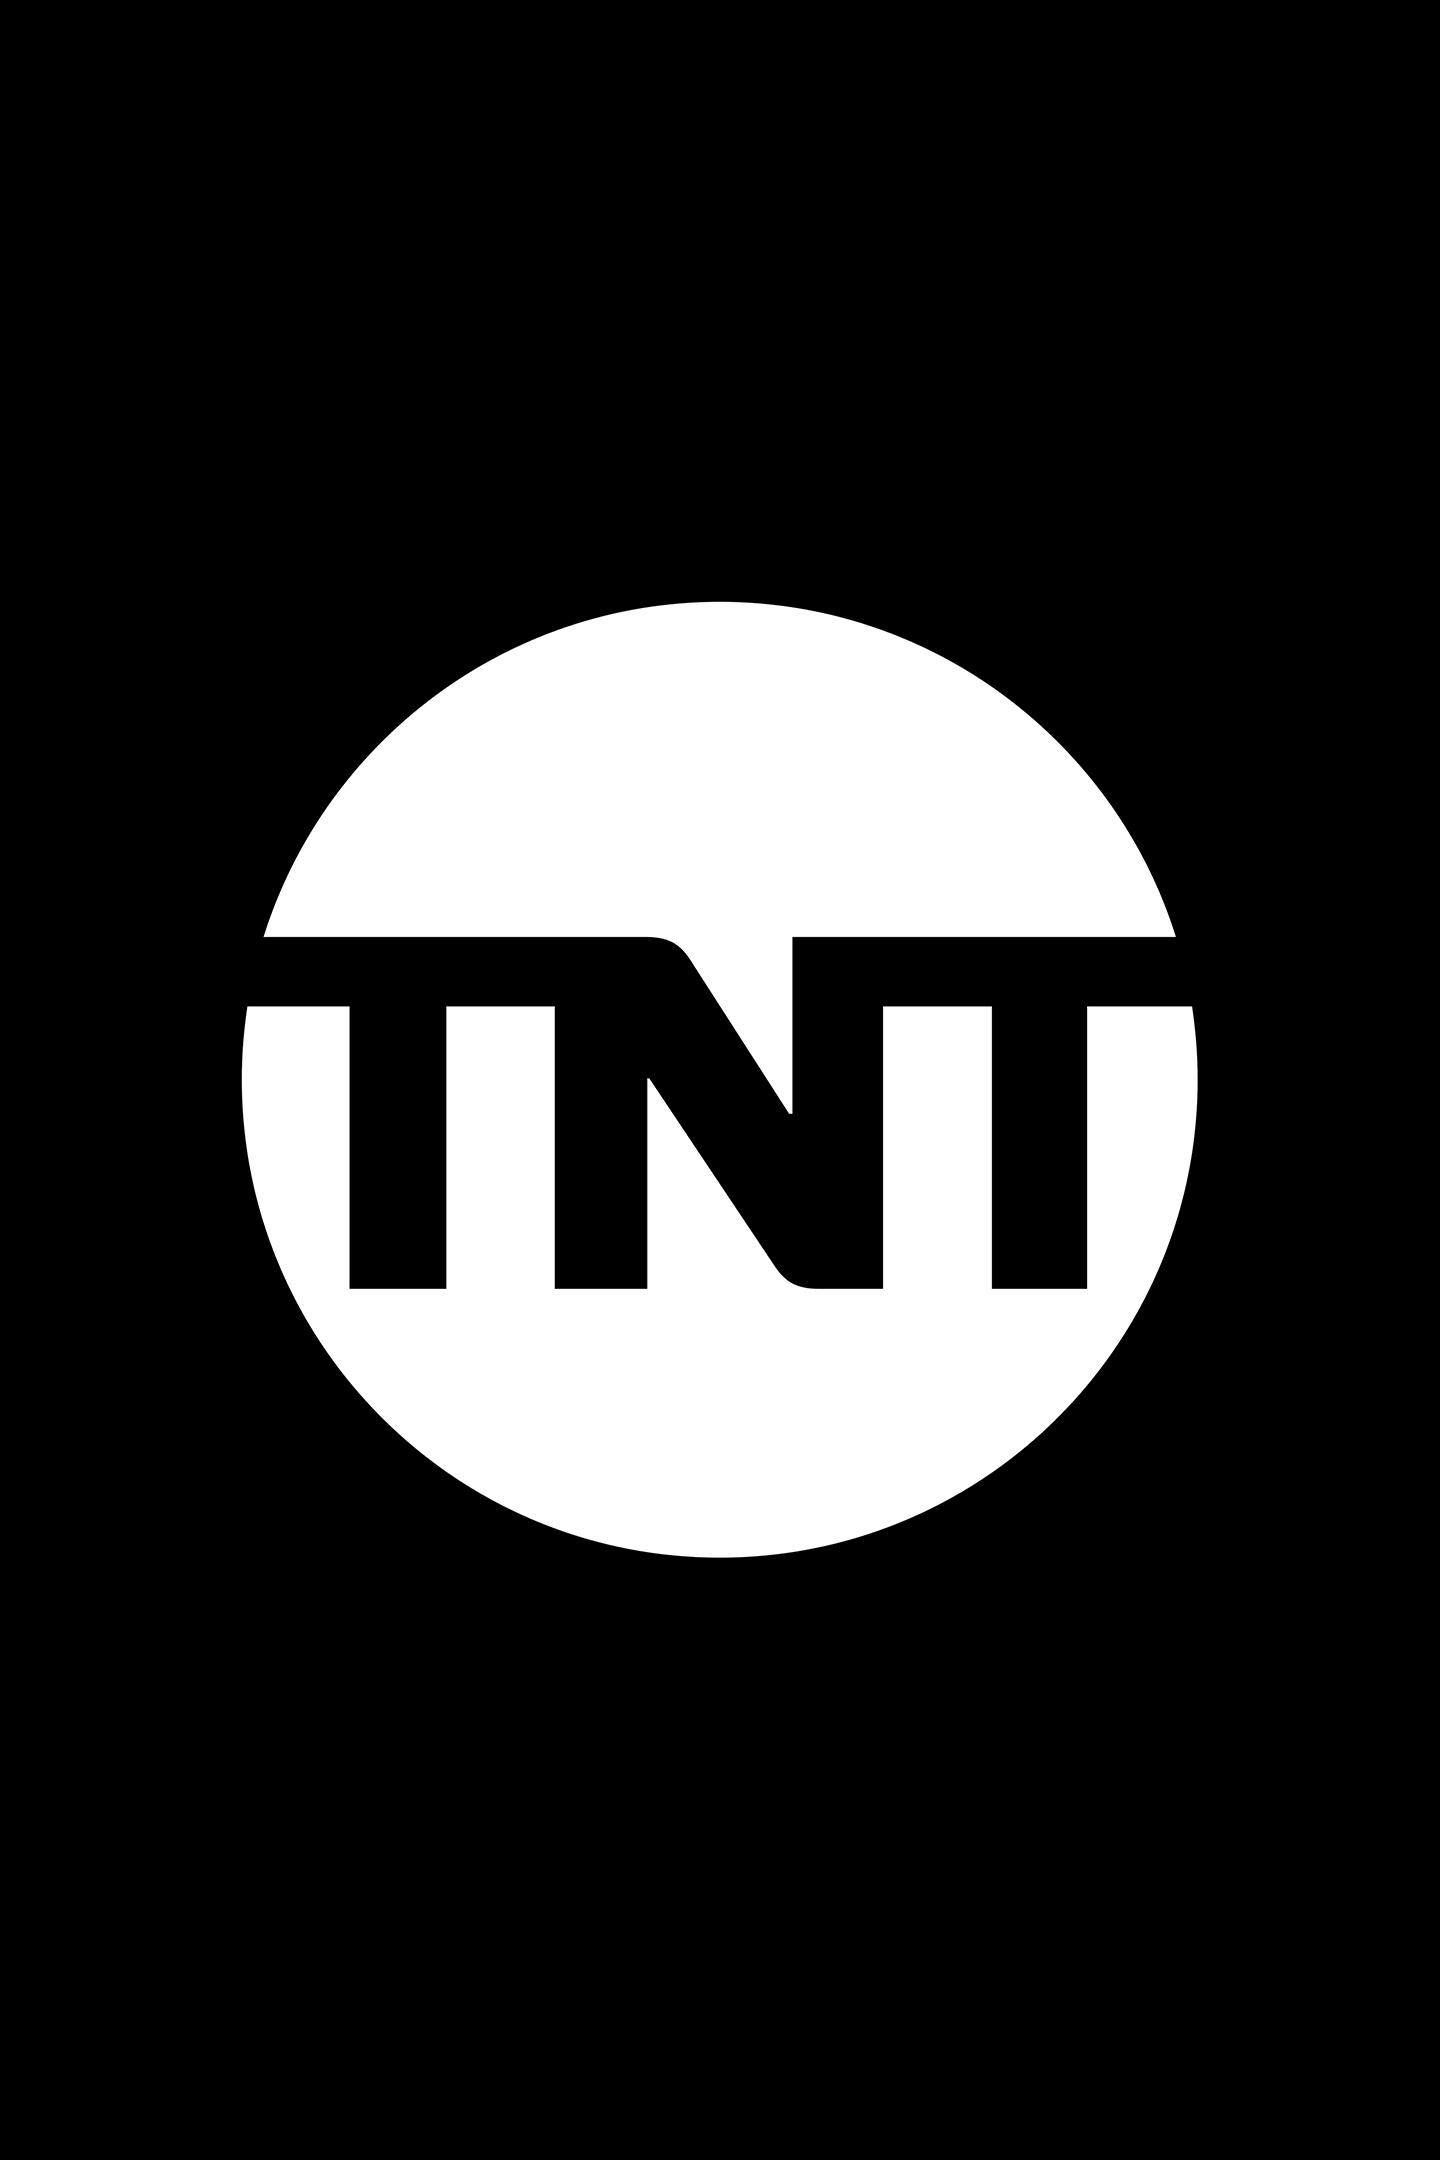 tnt for xbox